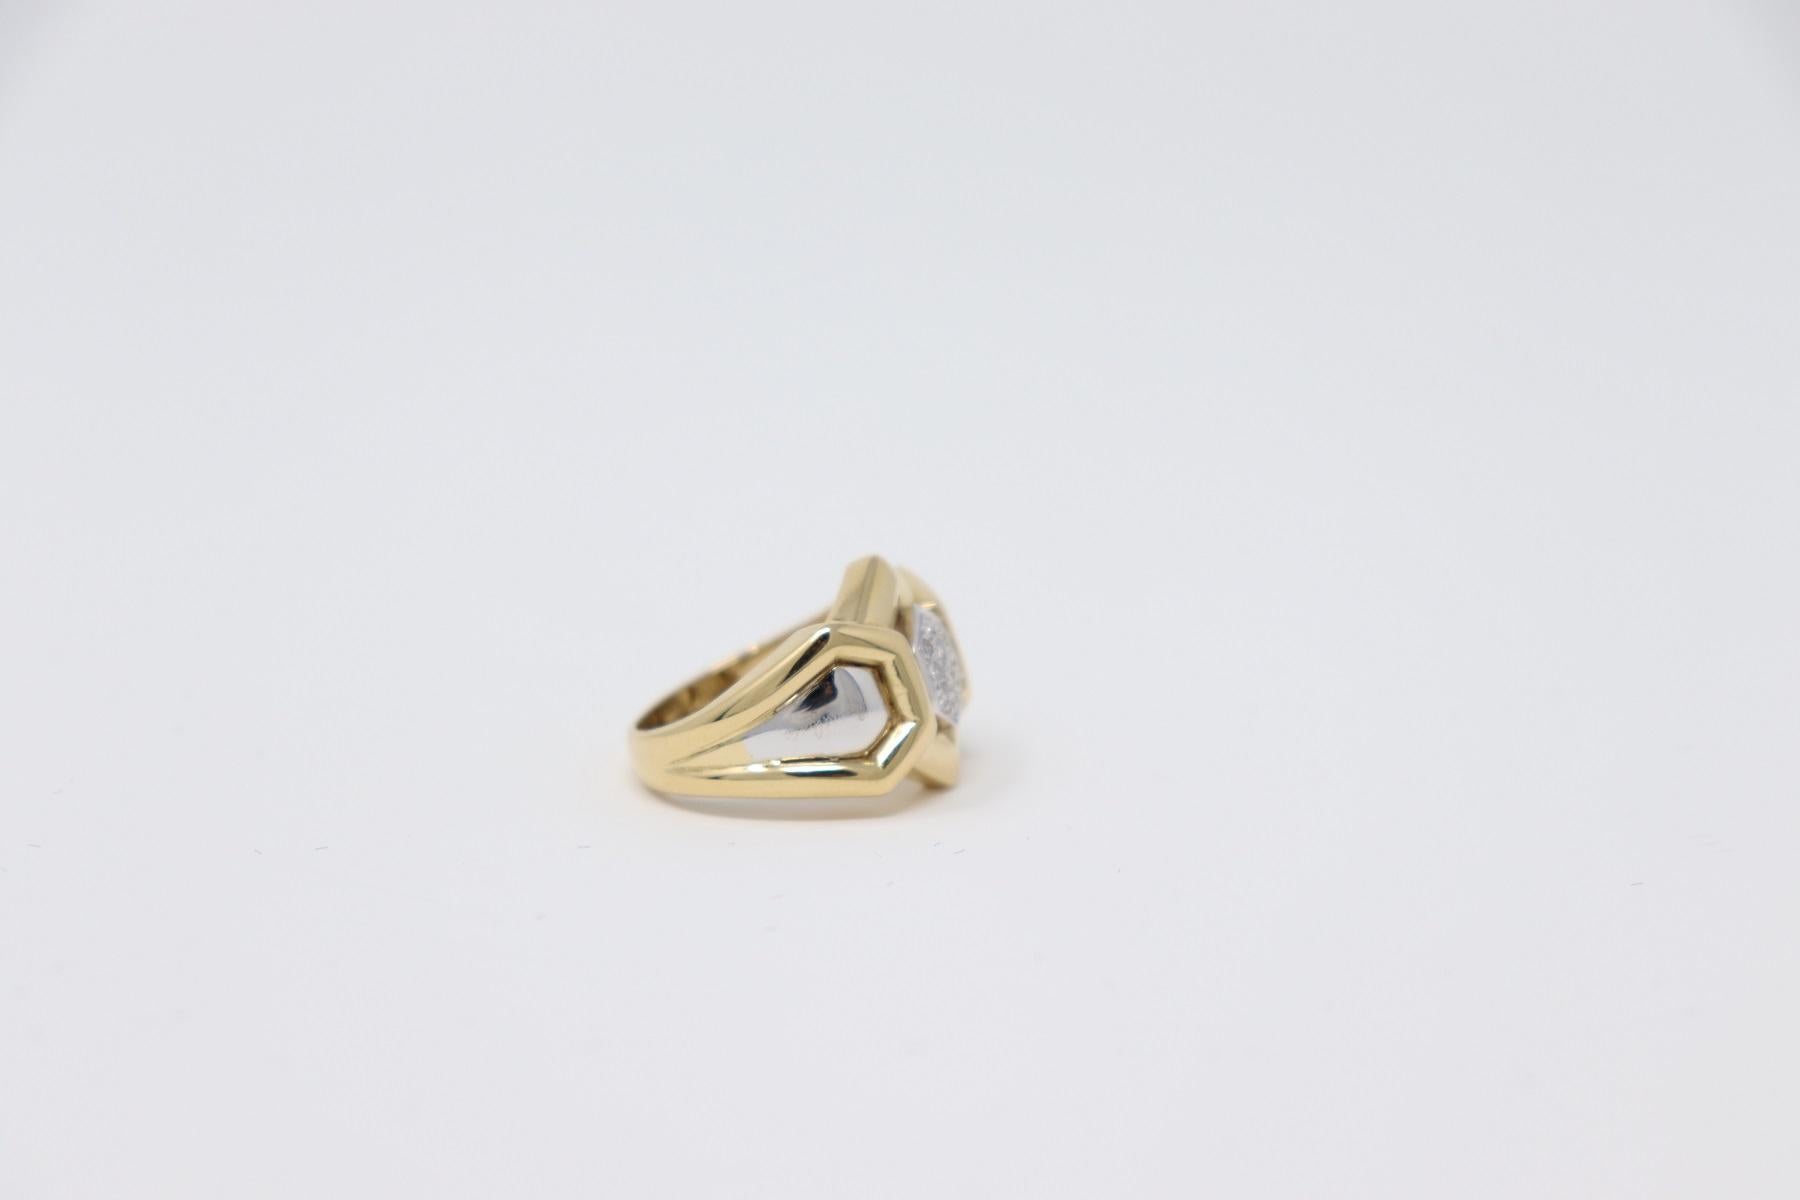 Gold and 0.12 Carat Diamonds Signert Ring by Gianni Carità For Sale 1